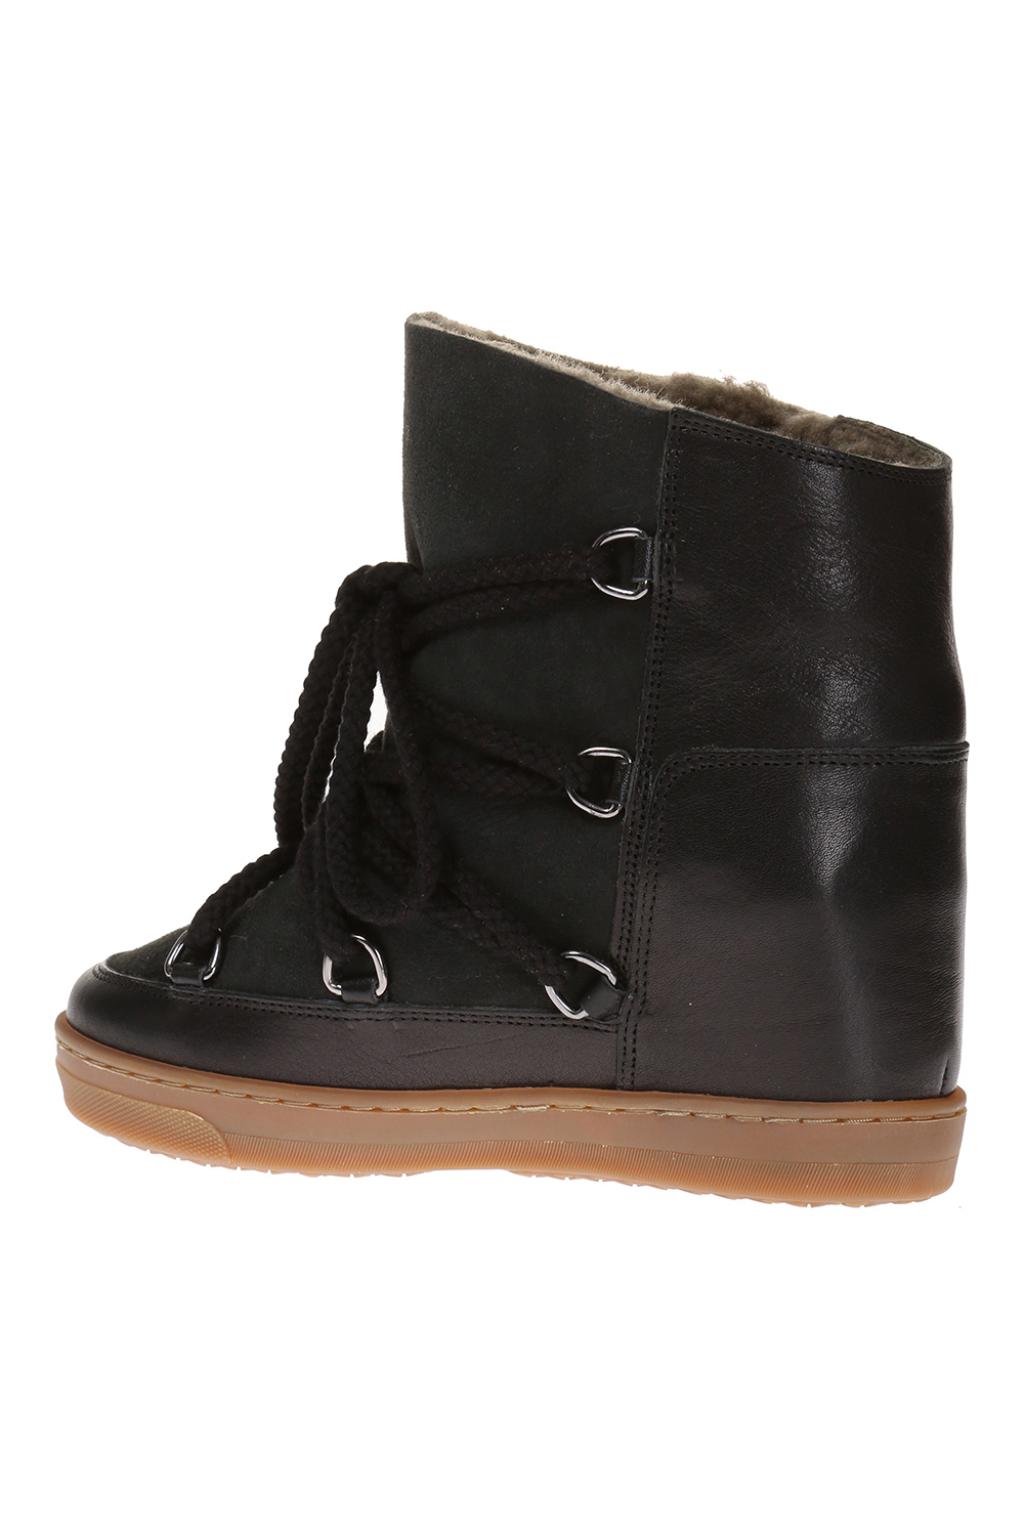 Isabel Marant 'Nowles' built-in wedge shoes